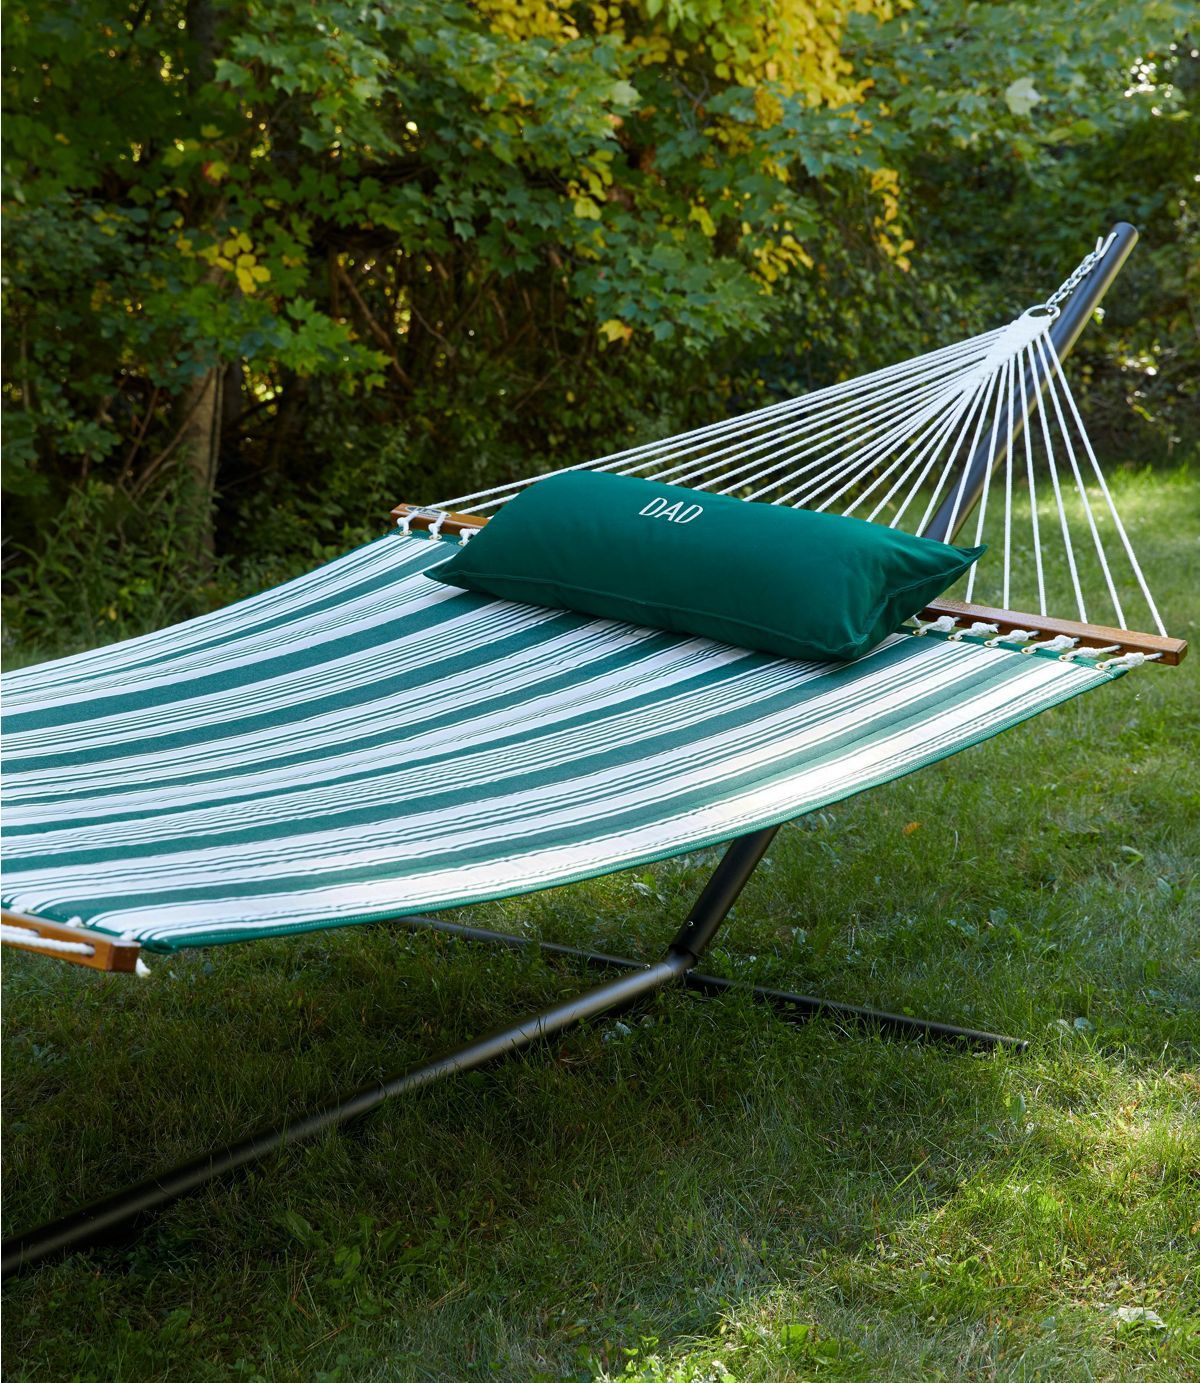 10 Best Hammocks To Relax In Your Backyard All Summer 2021